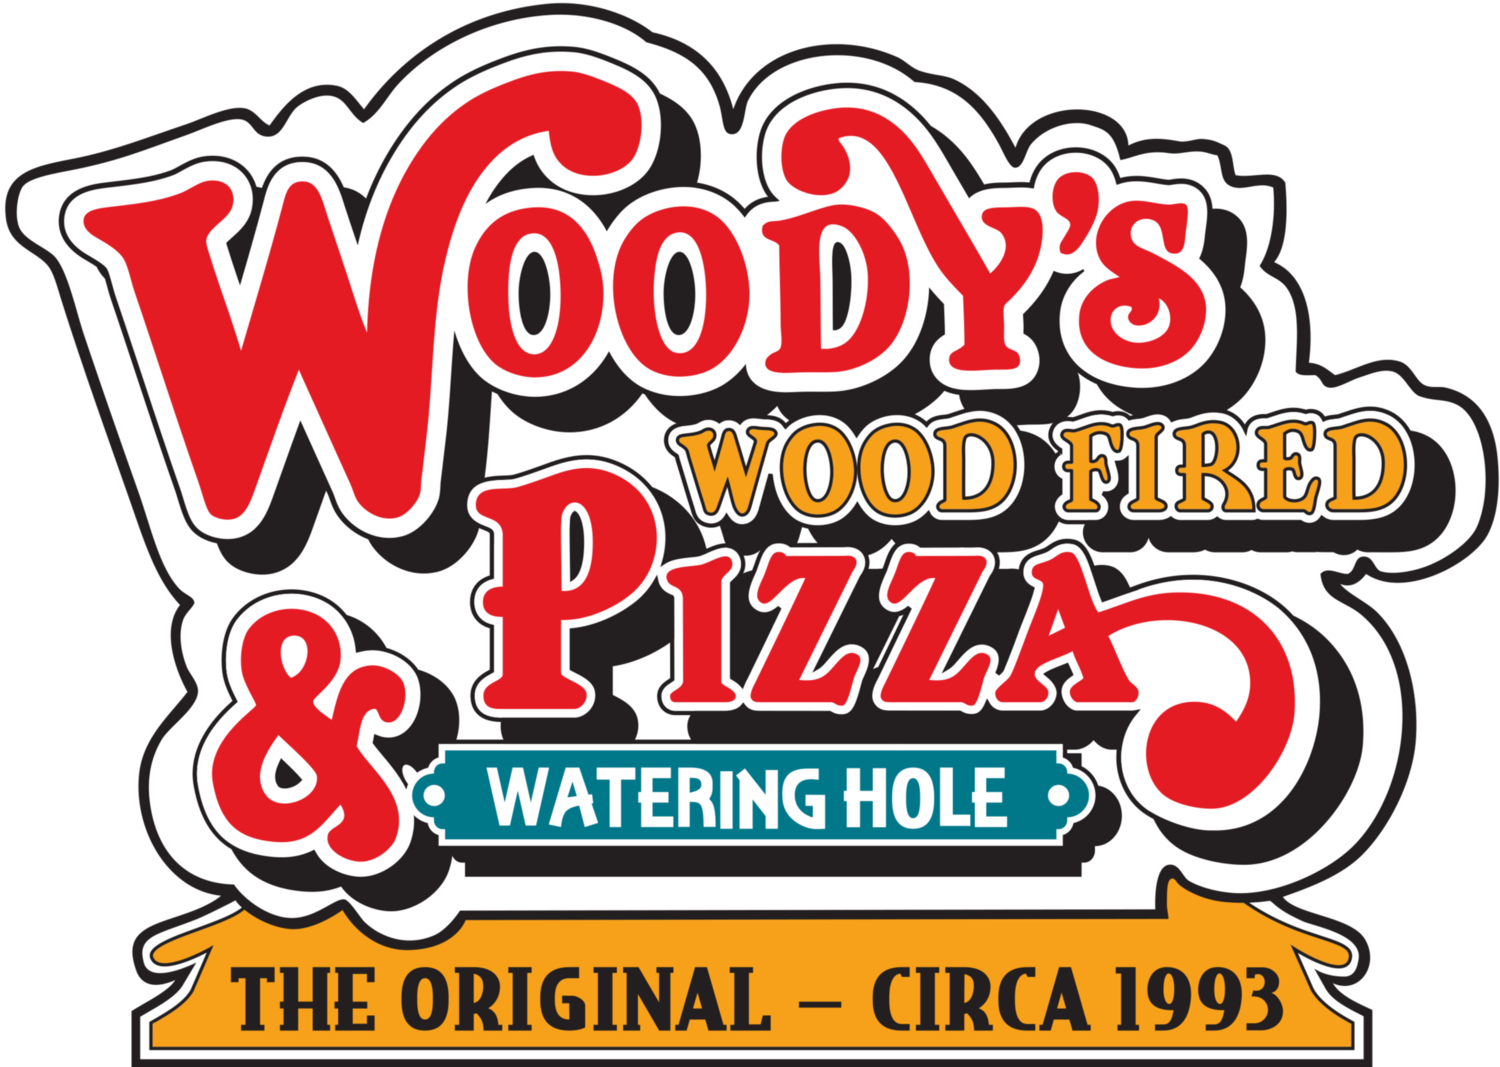 Woody’s Woodfired Pizza & Watering Hole